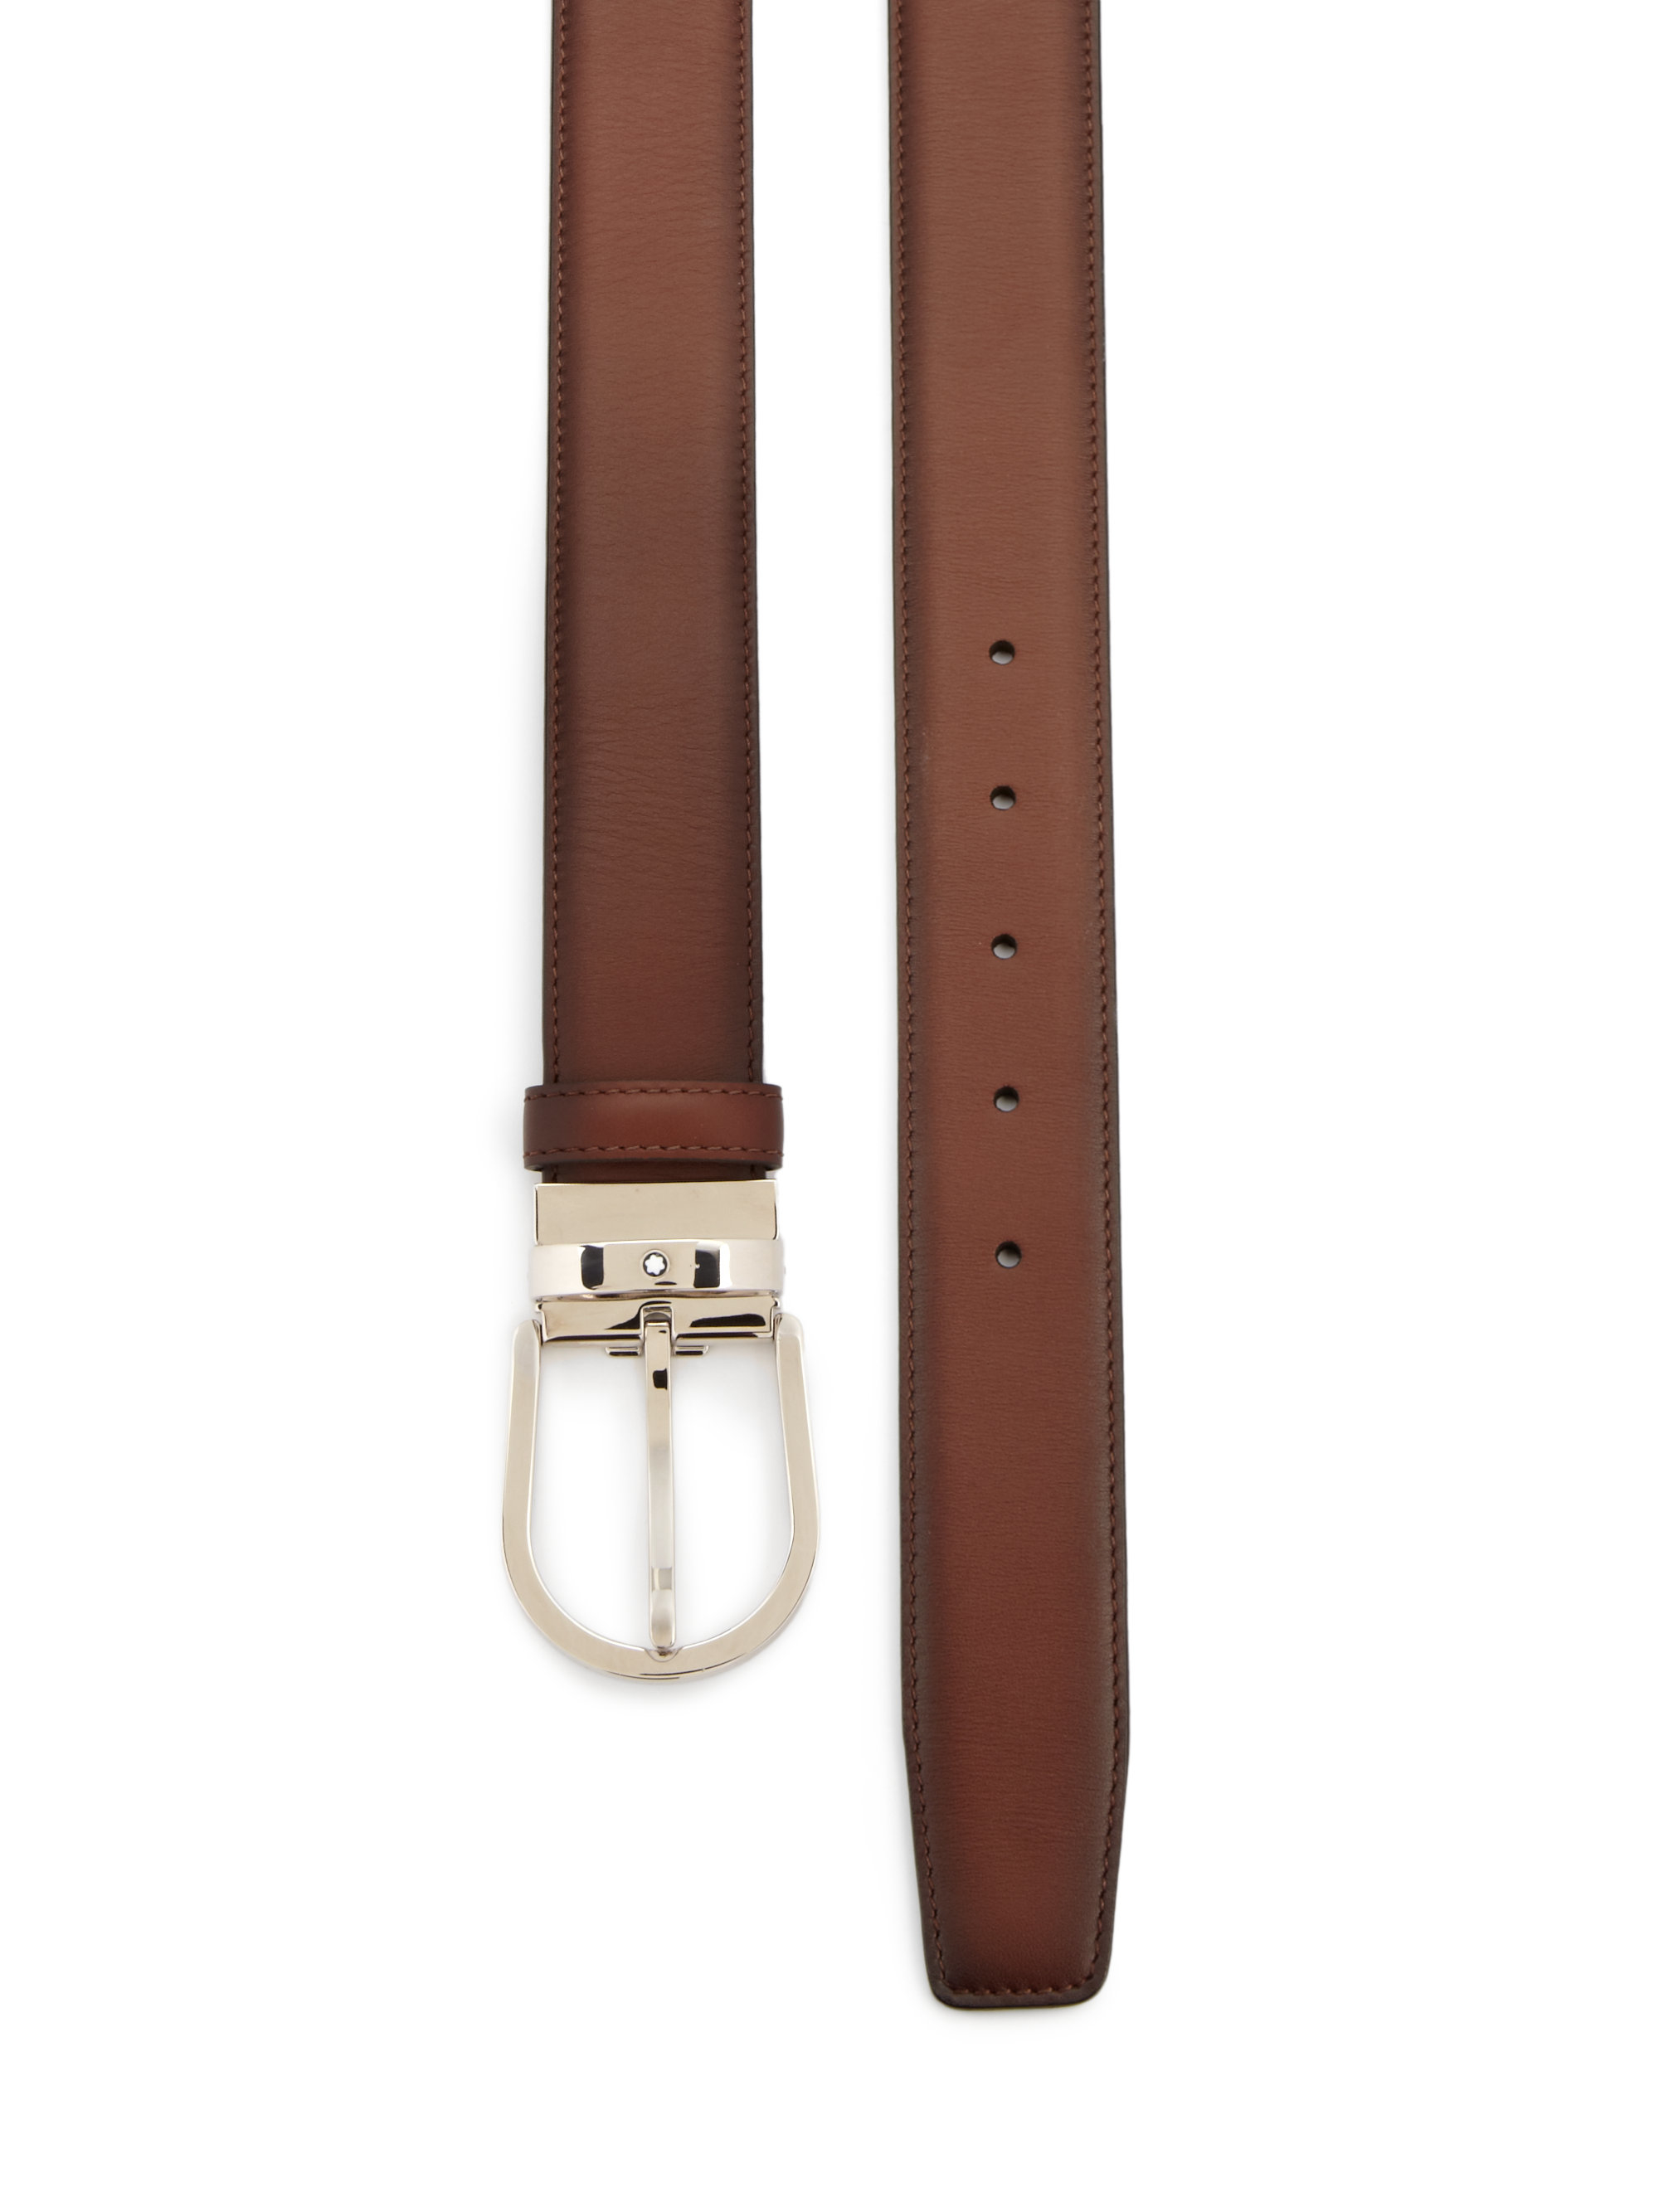 Lyst - Montblanc Horseshoe-Pin Leather Belt in Brown for Men